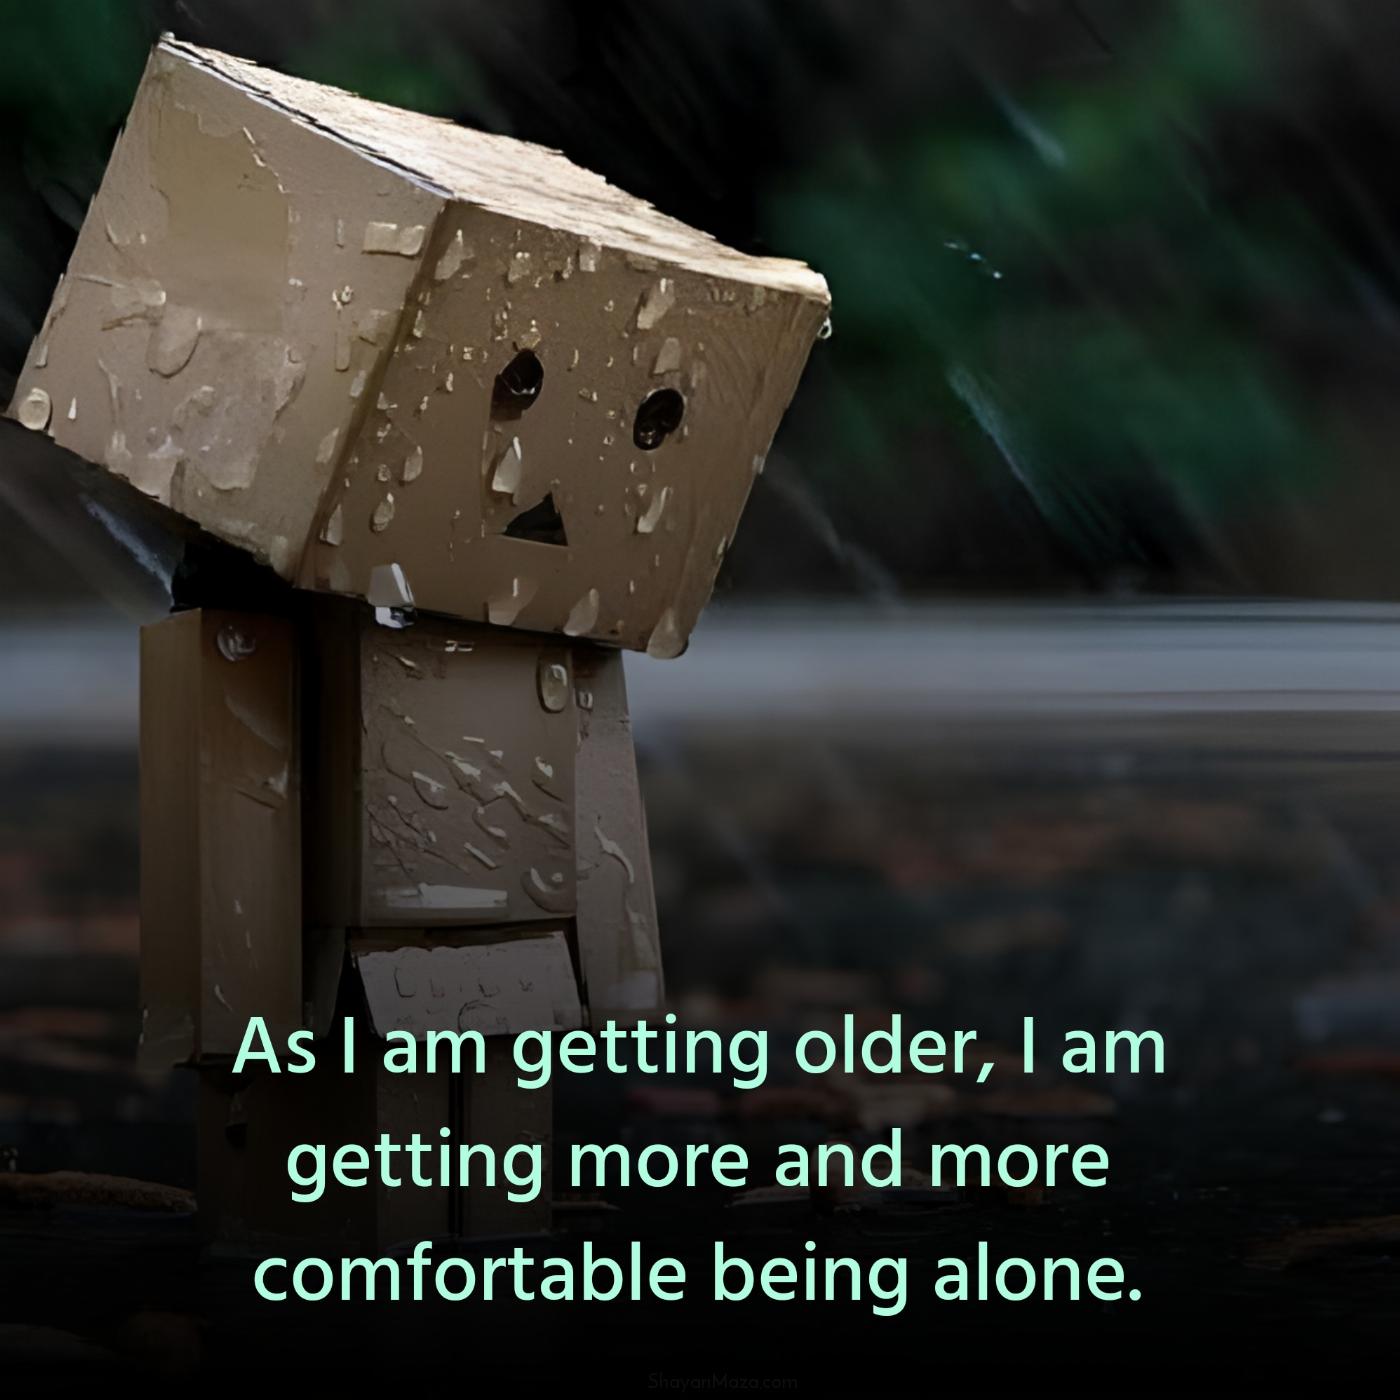 As I am getting older I am getting more and more comfortable